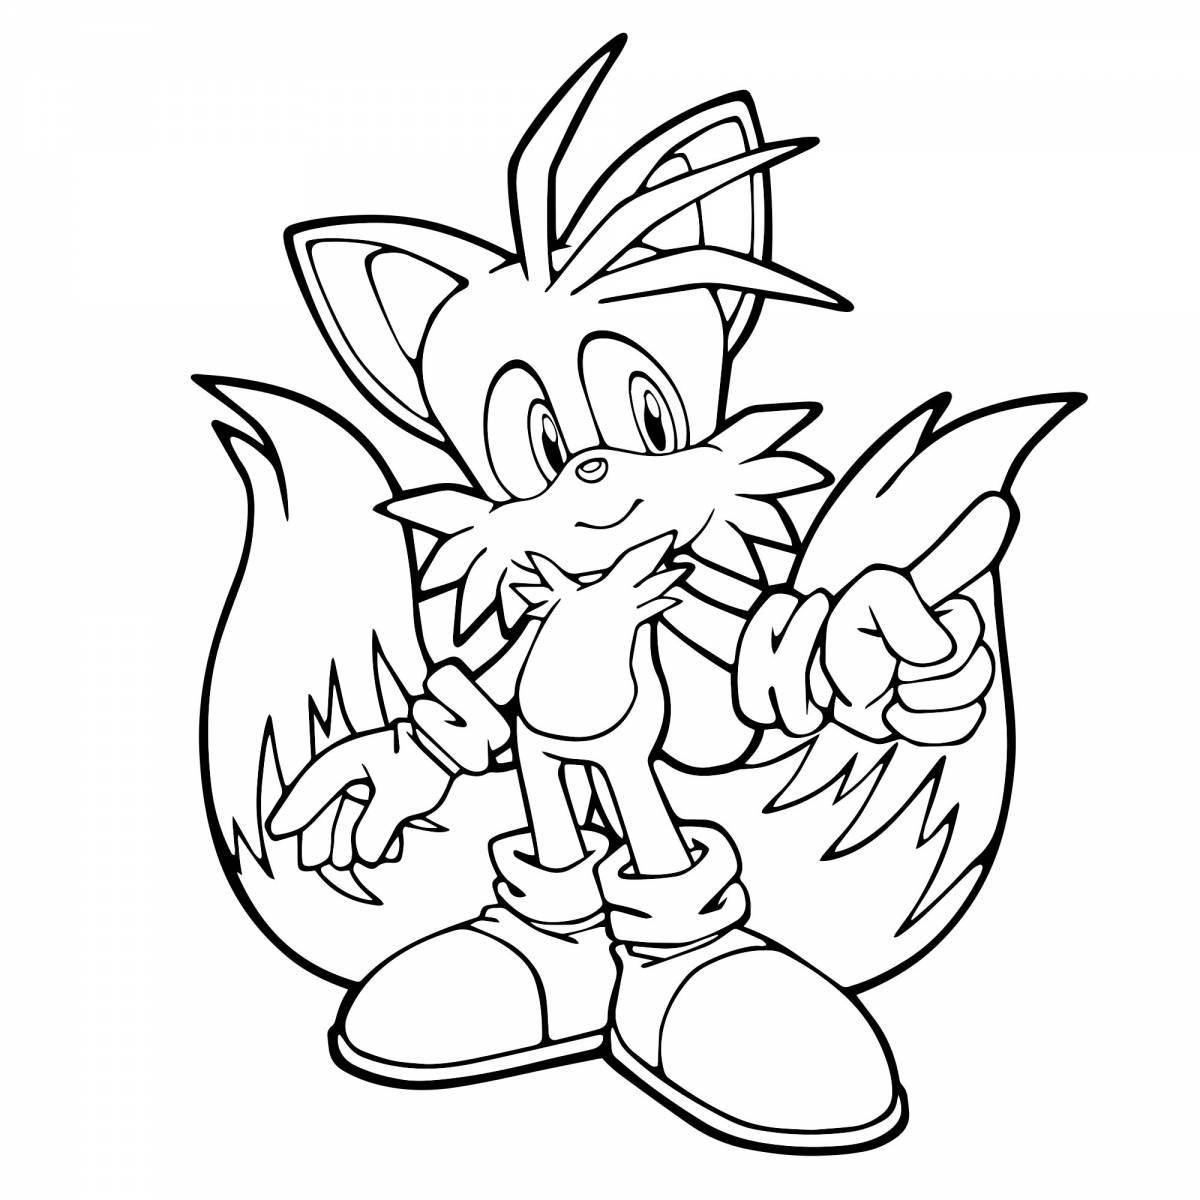 Animated sonic hedgehog coloring book